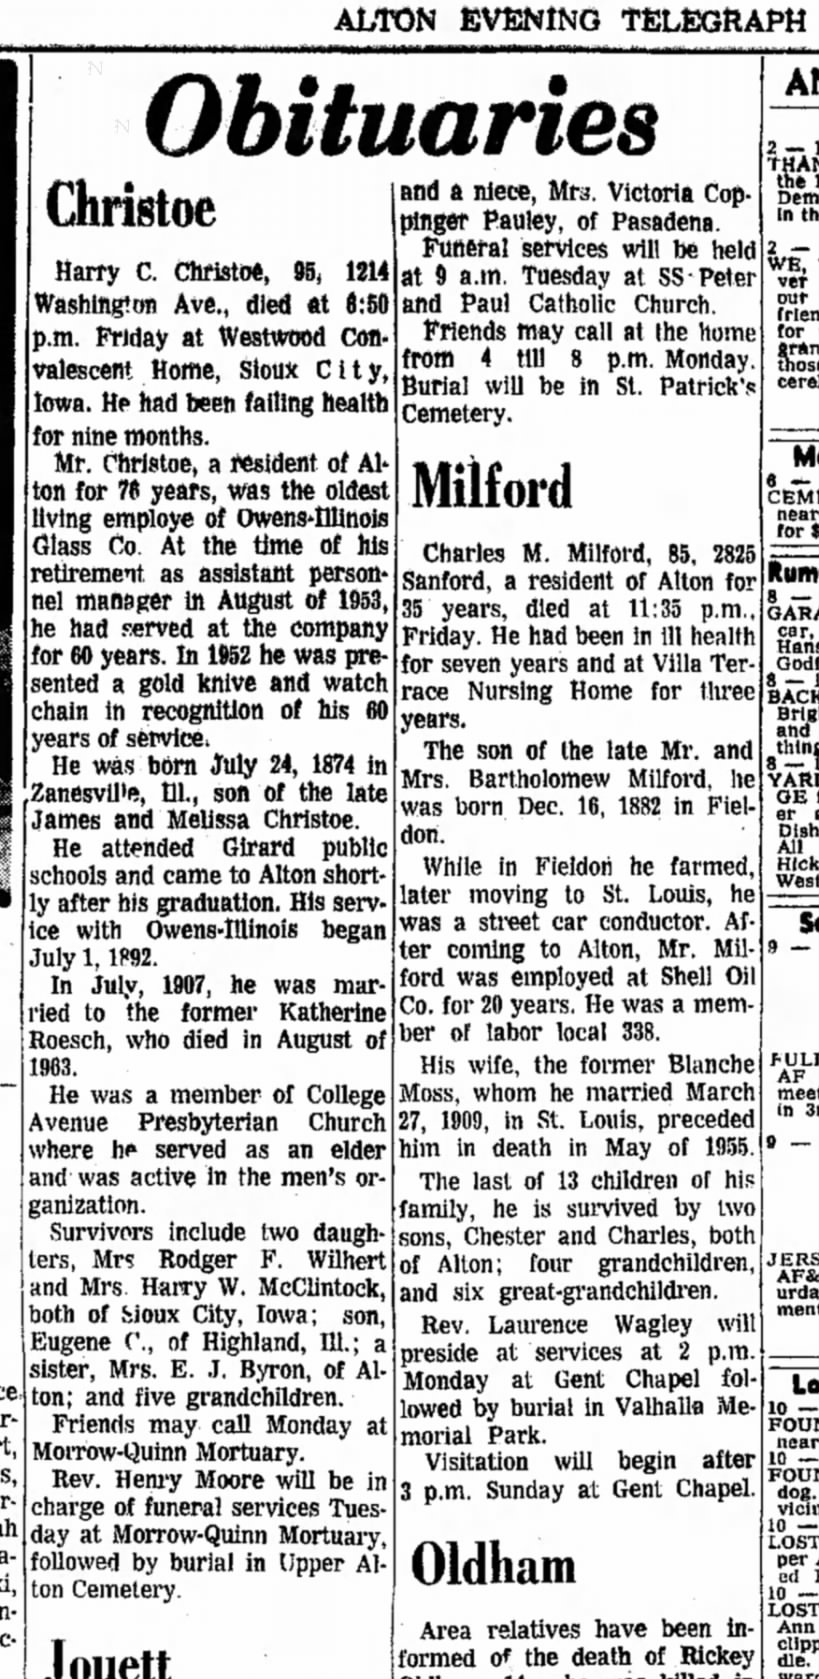 B Milford's son and Harry Christoe Obits